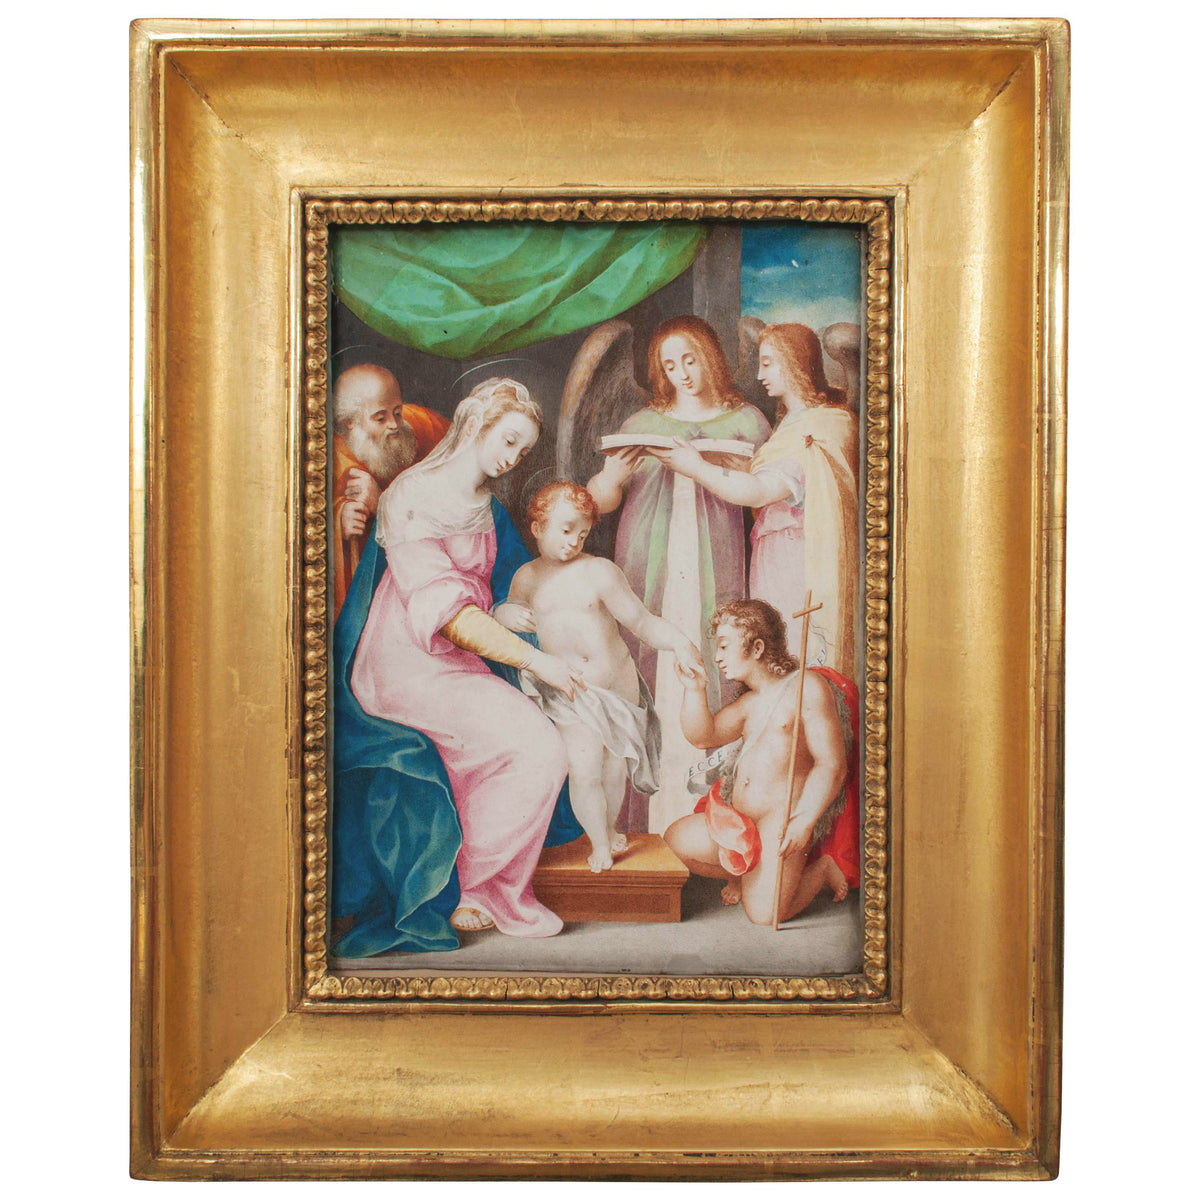 Italian Renaissance Tempera on Parchment Painting Holy Family by Giuseppe Cesari